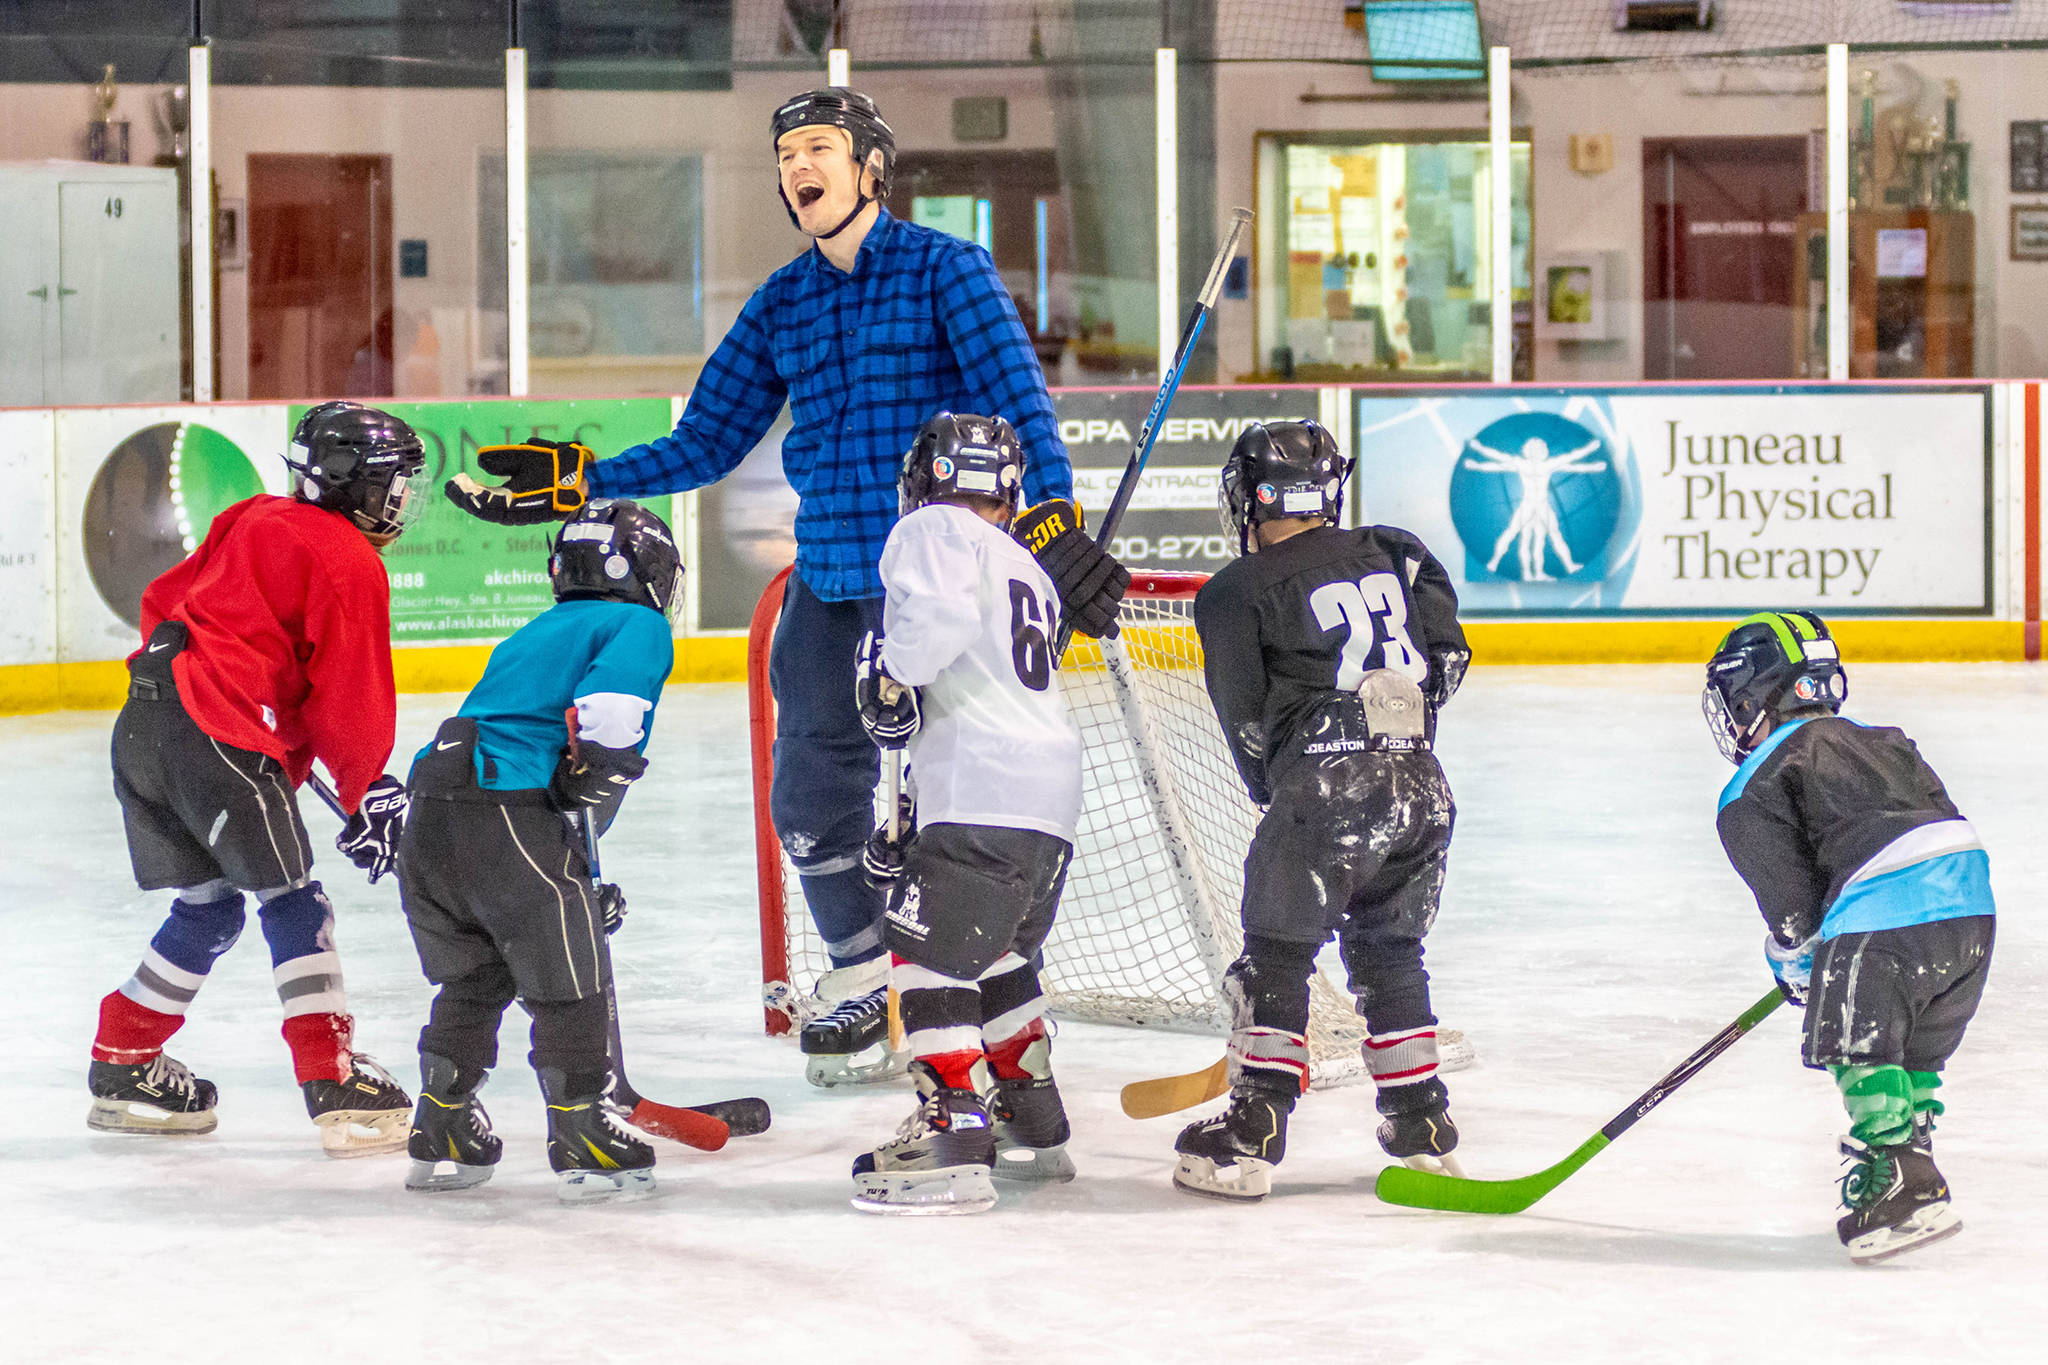 Students of the game: Intro hockey classes in full swing